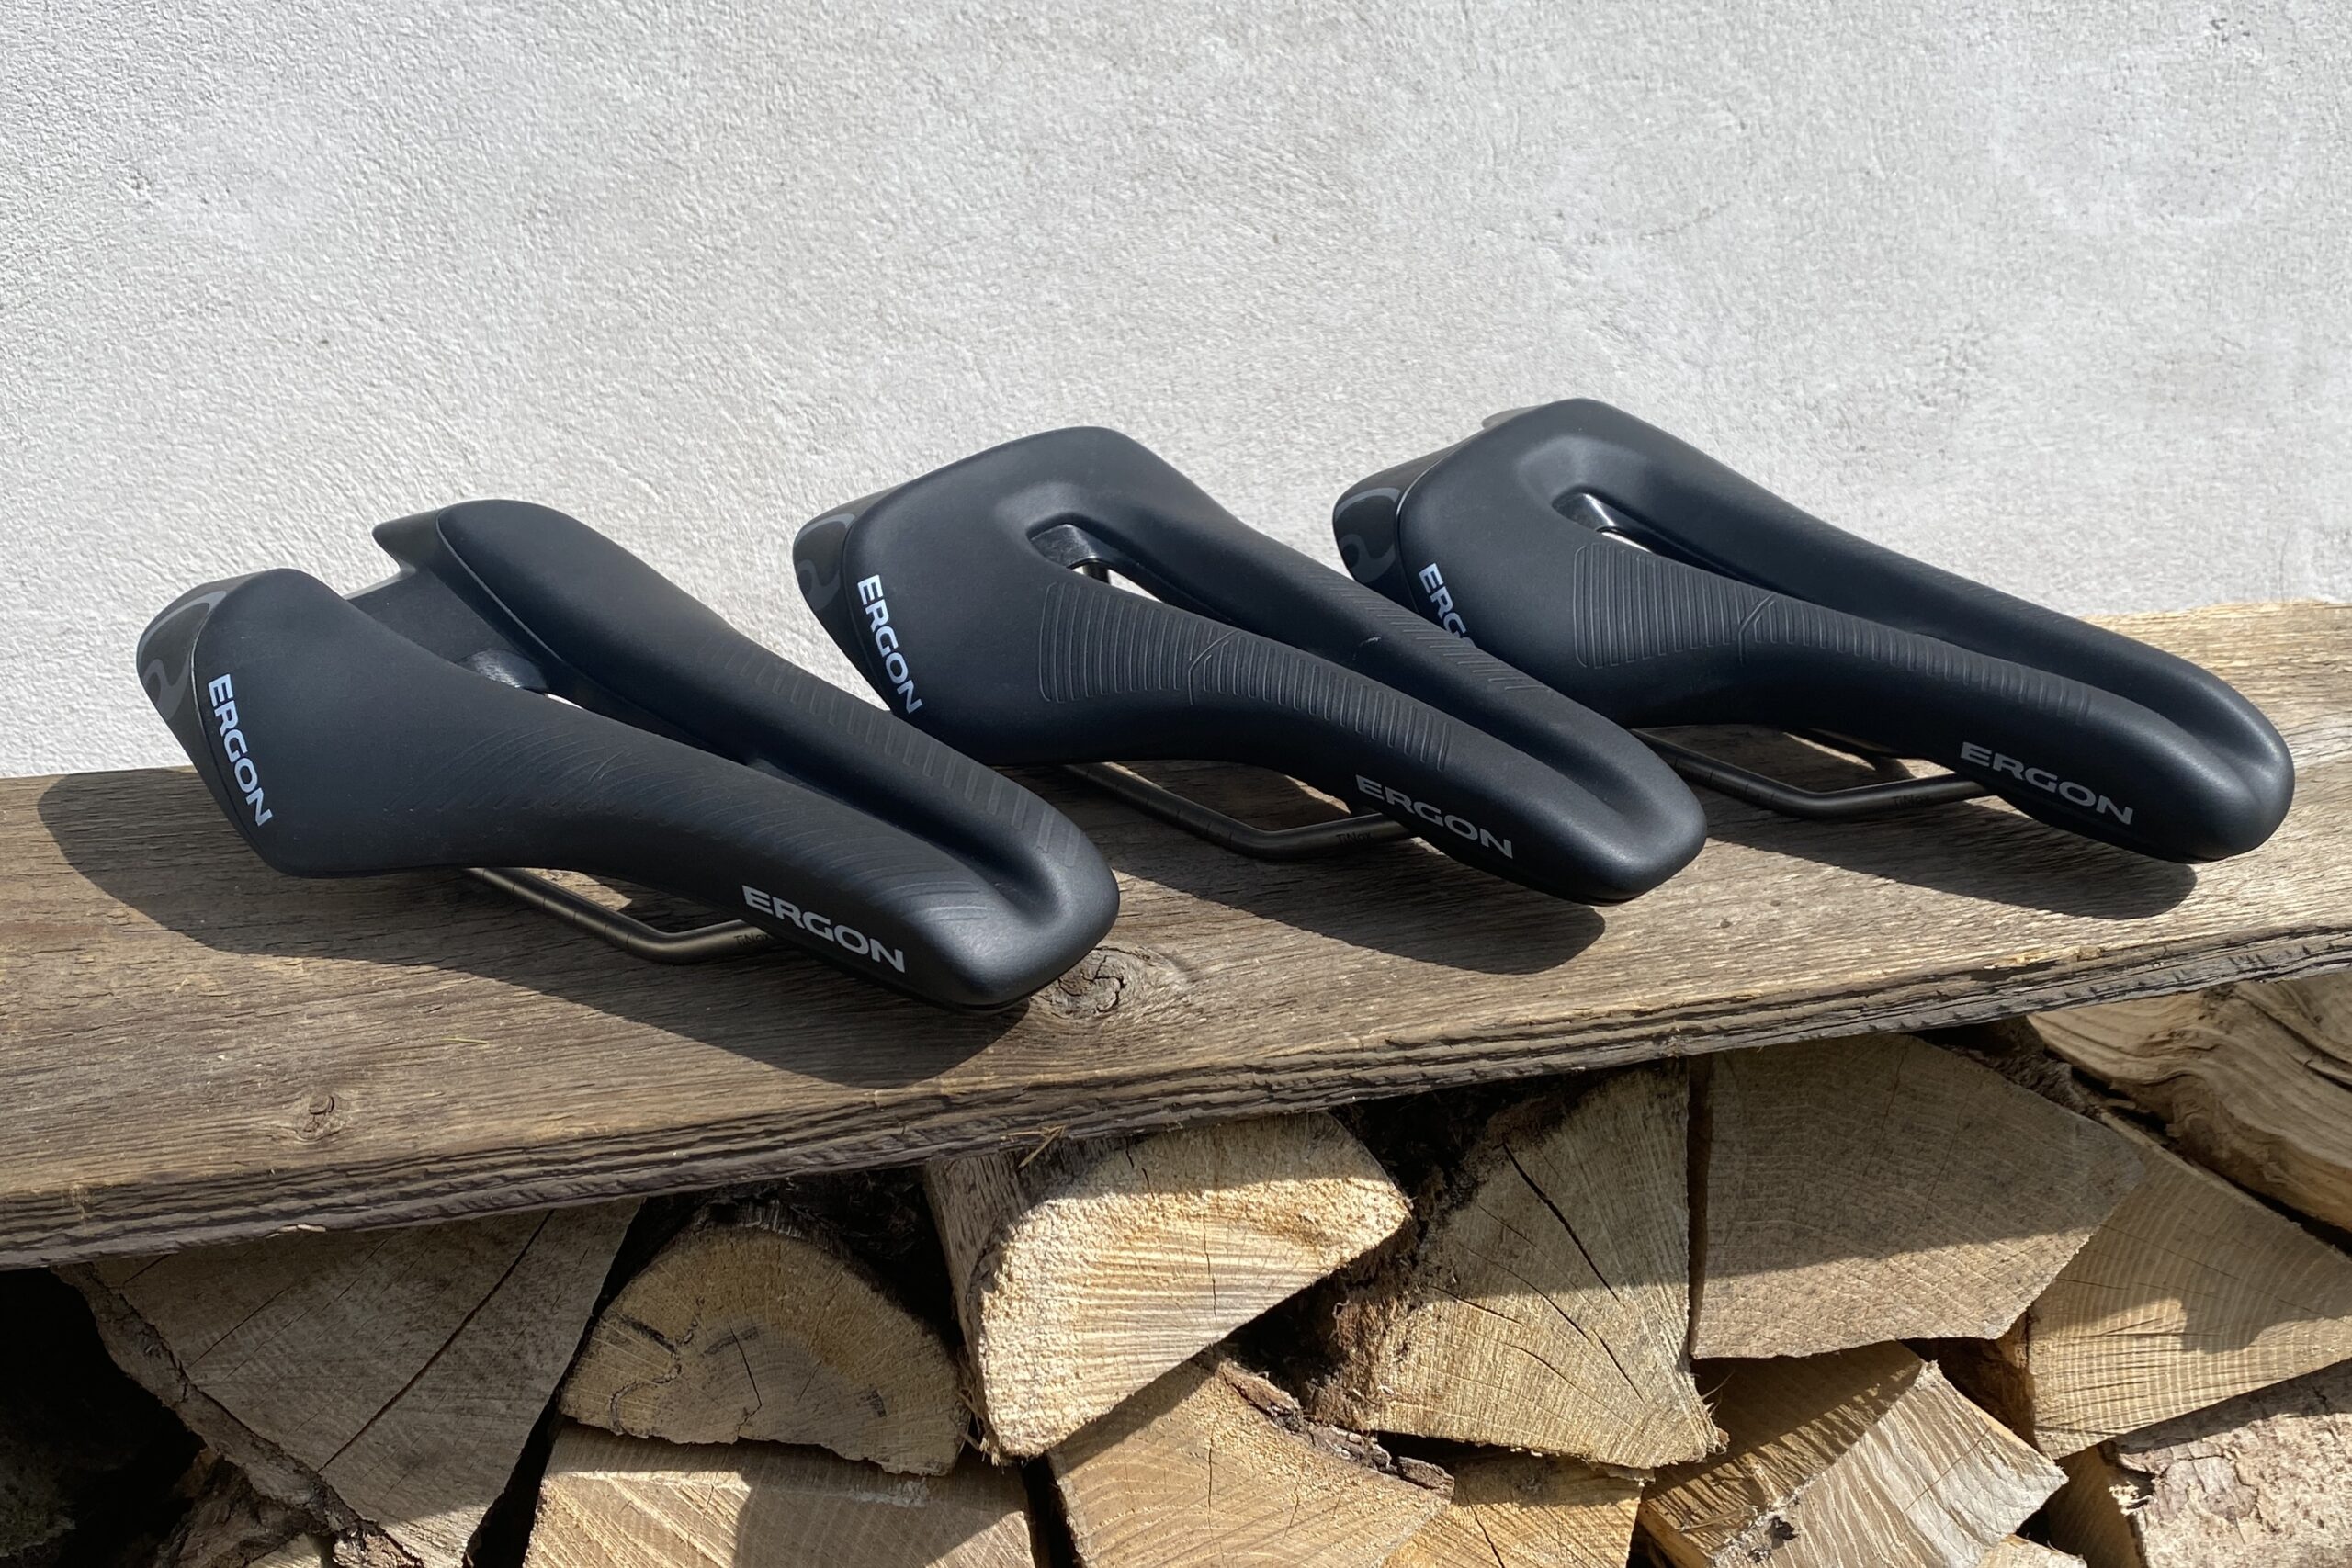 Ergon SR Tri Series is Squarely For Power Production